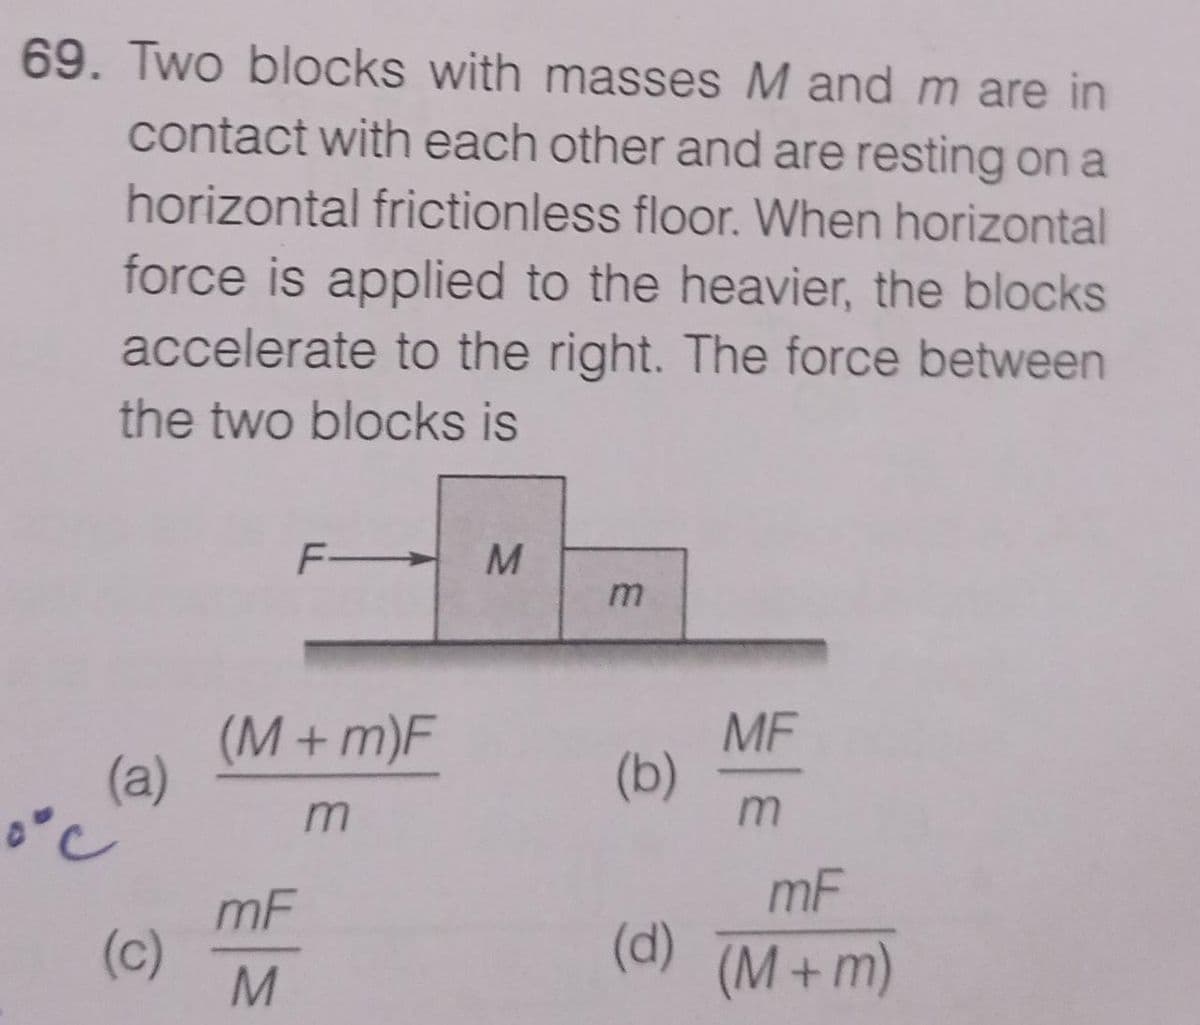 69. Two blocks with masses M and m are in
contact with each other and are resting on a
horizontal frictionless floor. When horizontal
force is applied to the heavier, the blocks
accelerate to the right. The force between
the two blocks is
F
(M+ m)F
MF
(b)
(a)
mF
mF
(c)
(d)(M+m)
